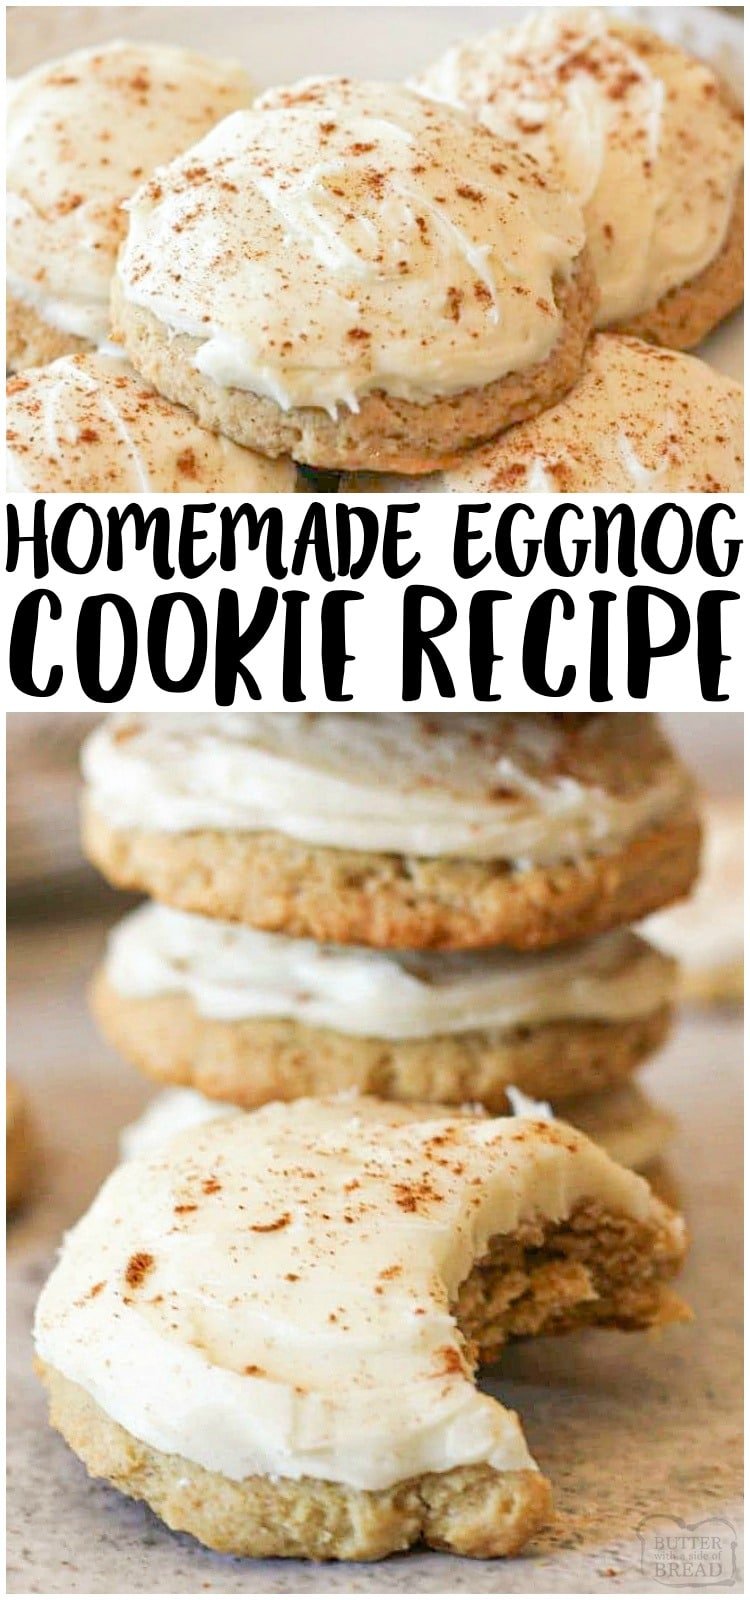 Eggnog Cookies perfect for Santa! Soft & chewy sugar cookies topped with a creamy frosting all with the delicious flavor of eggnog! Lovely cookie recipe for Eggnog lovers.